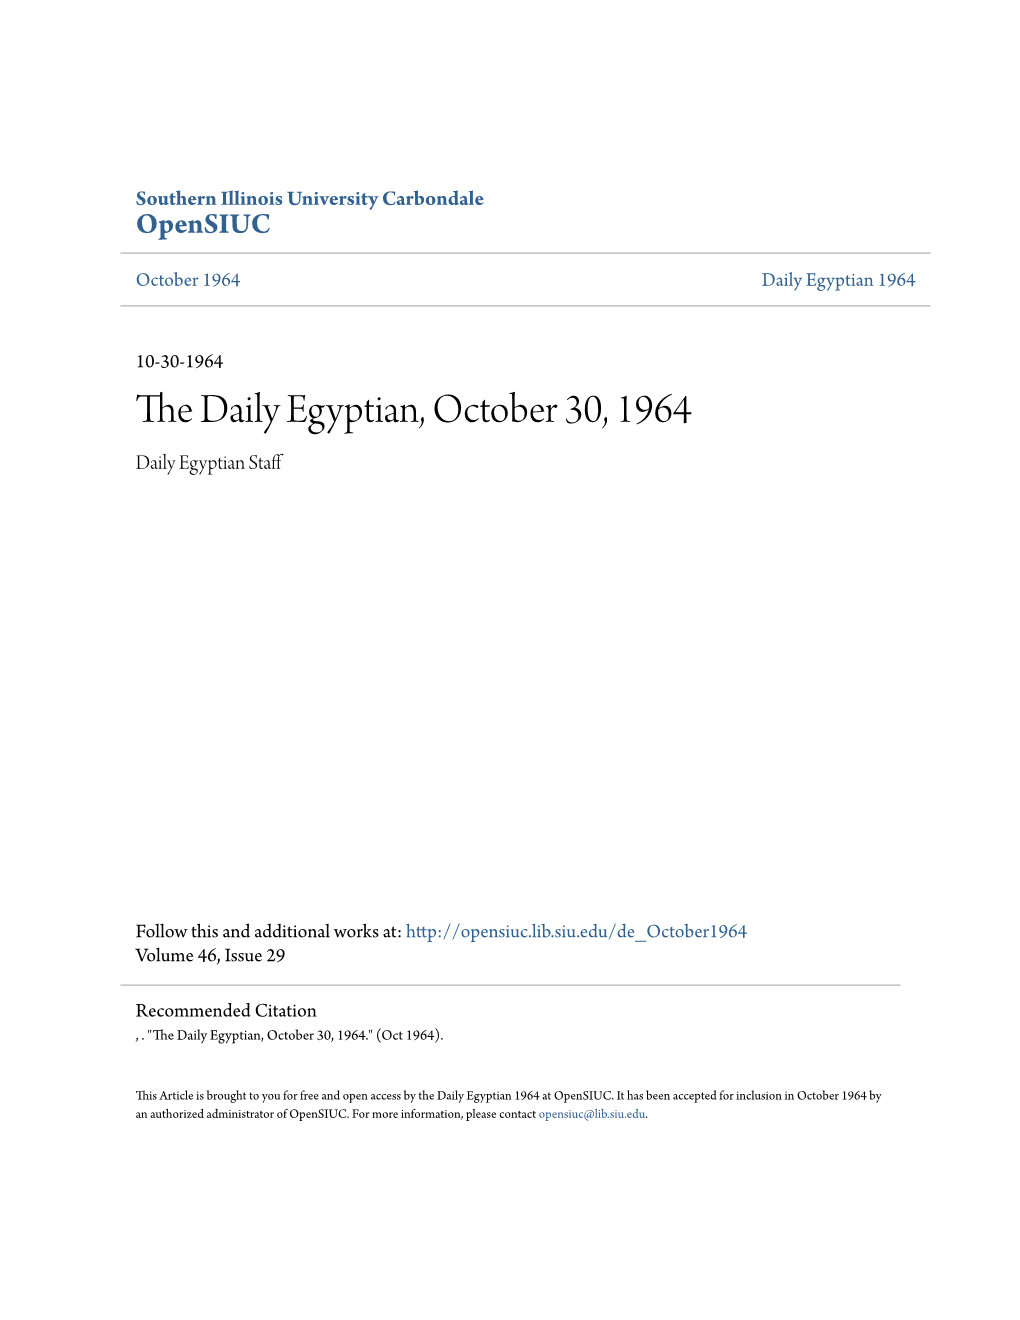 The Daily Egyptian, October 30, 1964